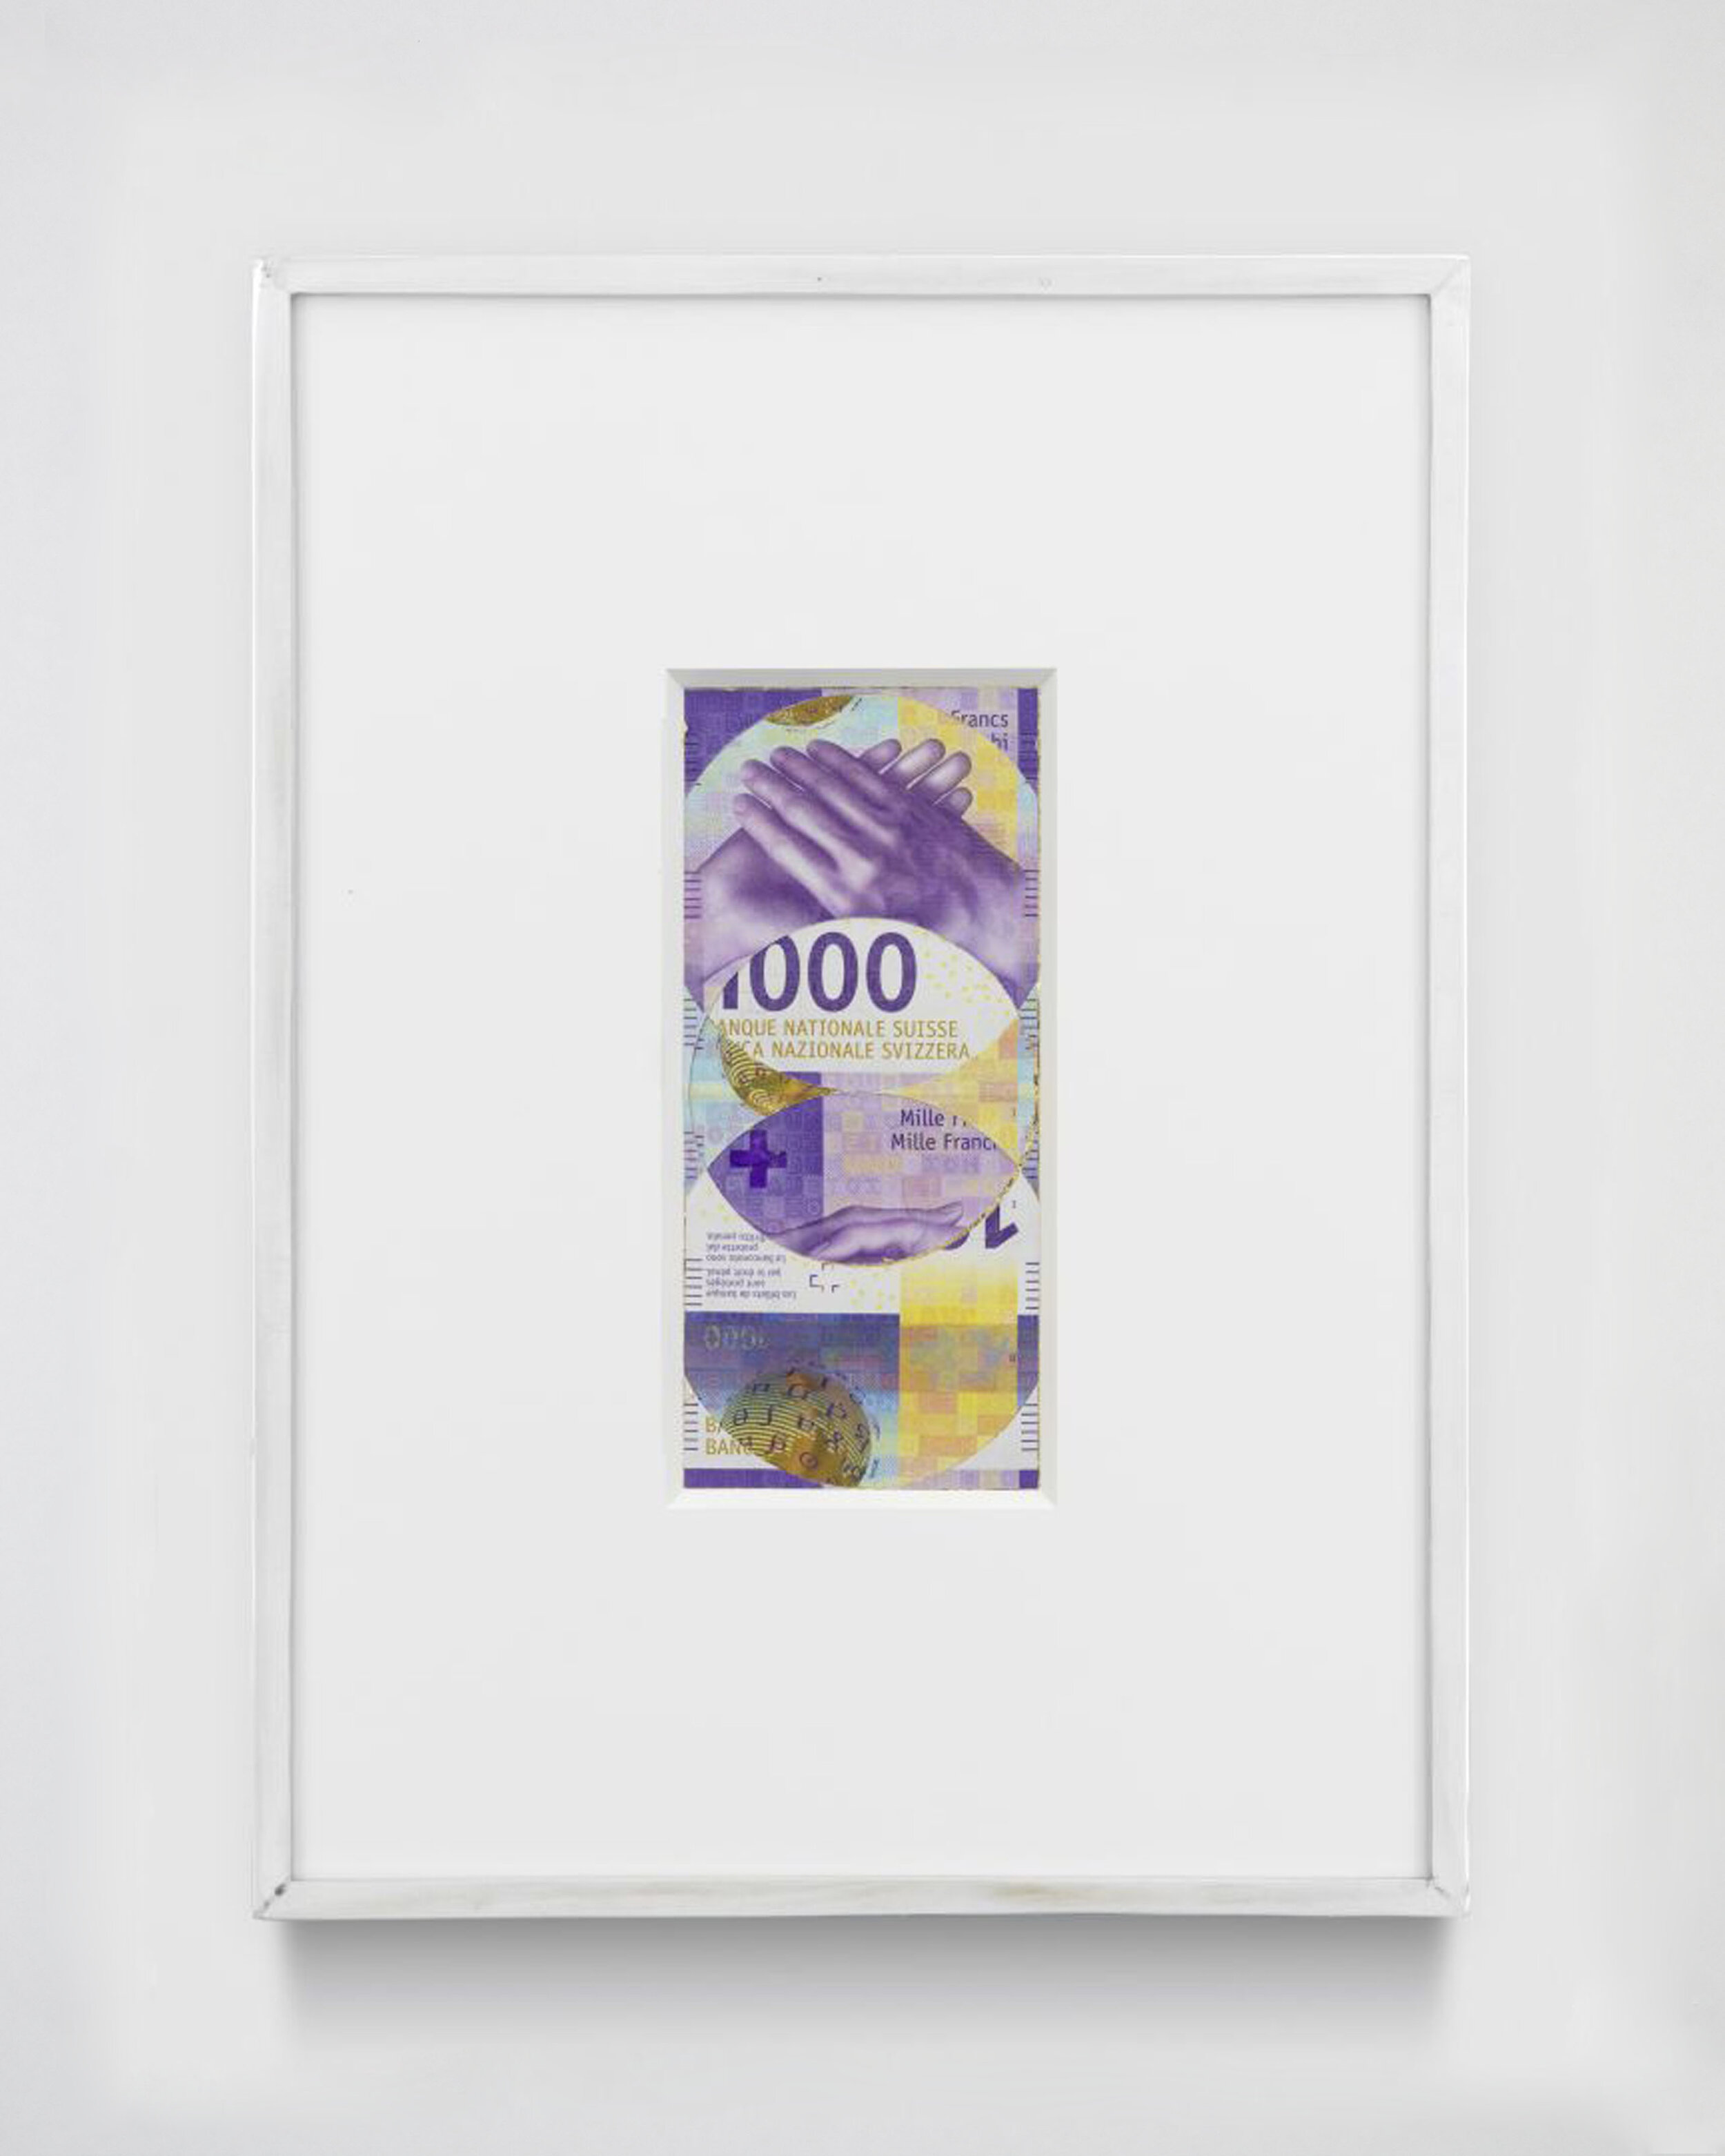   Blind Collage (Three 180º Rotations, Swiss National Bank One-Thousand-Franc Note: Series 2019, Issued by Banque Nationale Suisse, Printed in Zürich, Switzerland by Orell Füssli Security Printing Ltd., Designed by Manuela Pfrunder GMBH, Serial No. 1